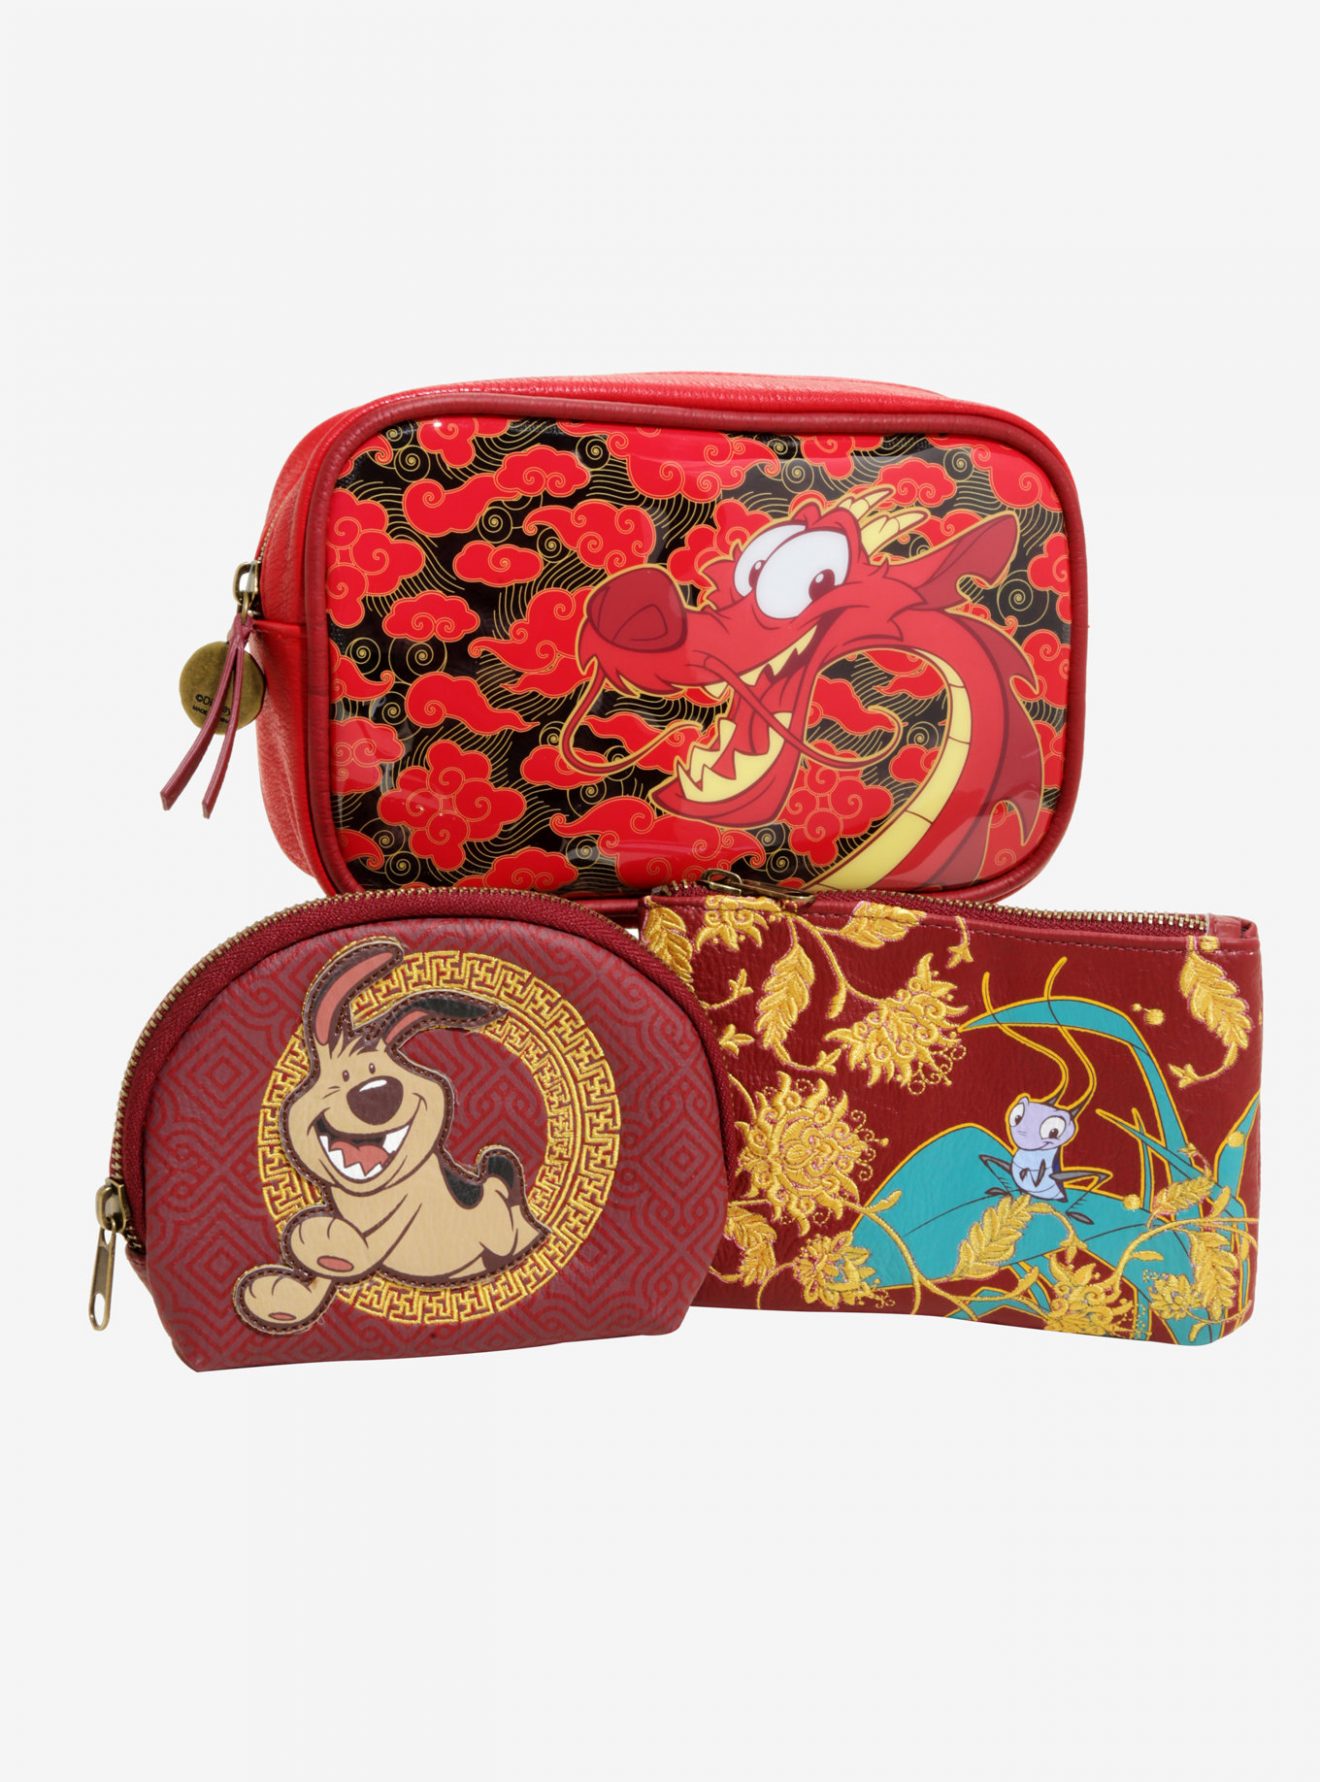 The Loungefly Mulan Makeup Bag Set is Fit for a Hero